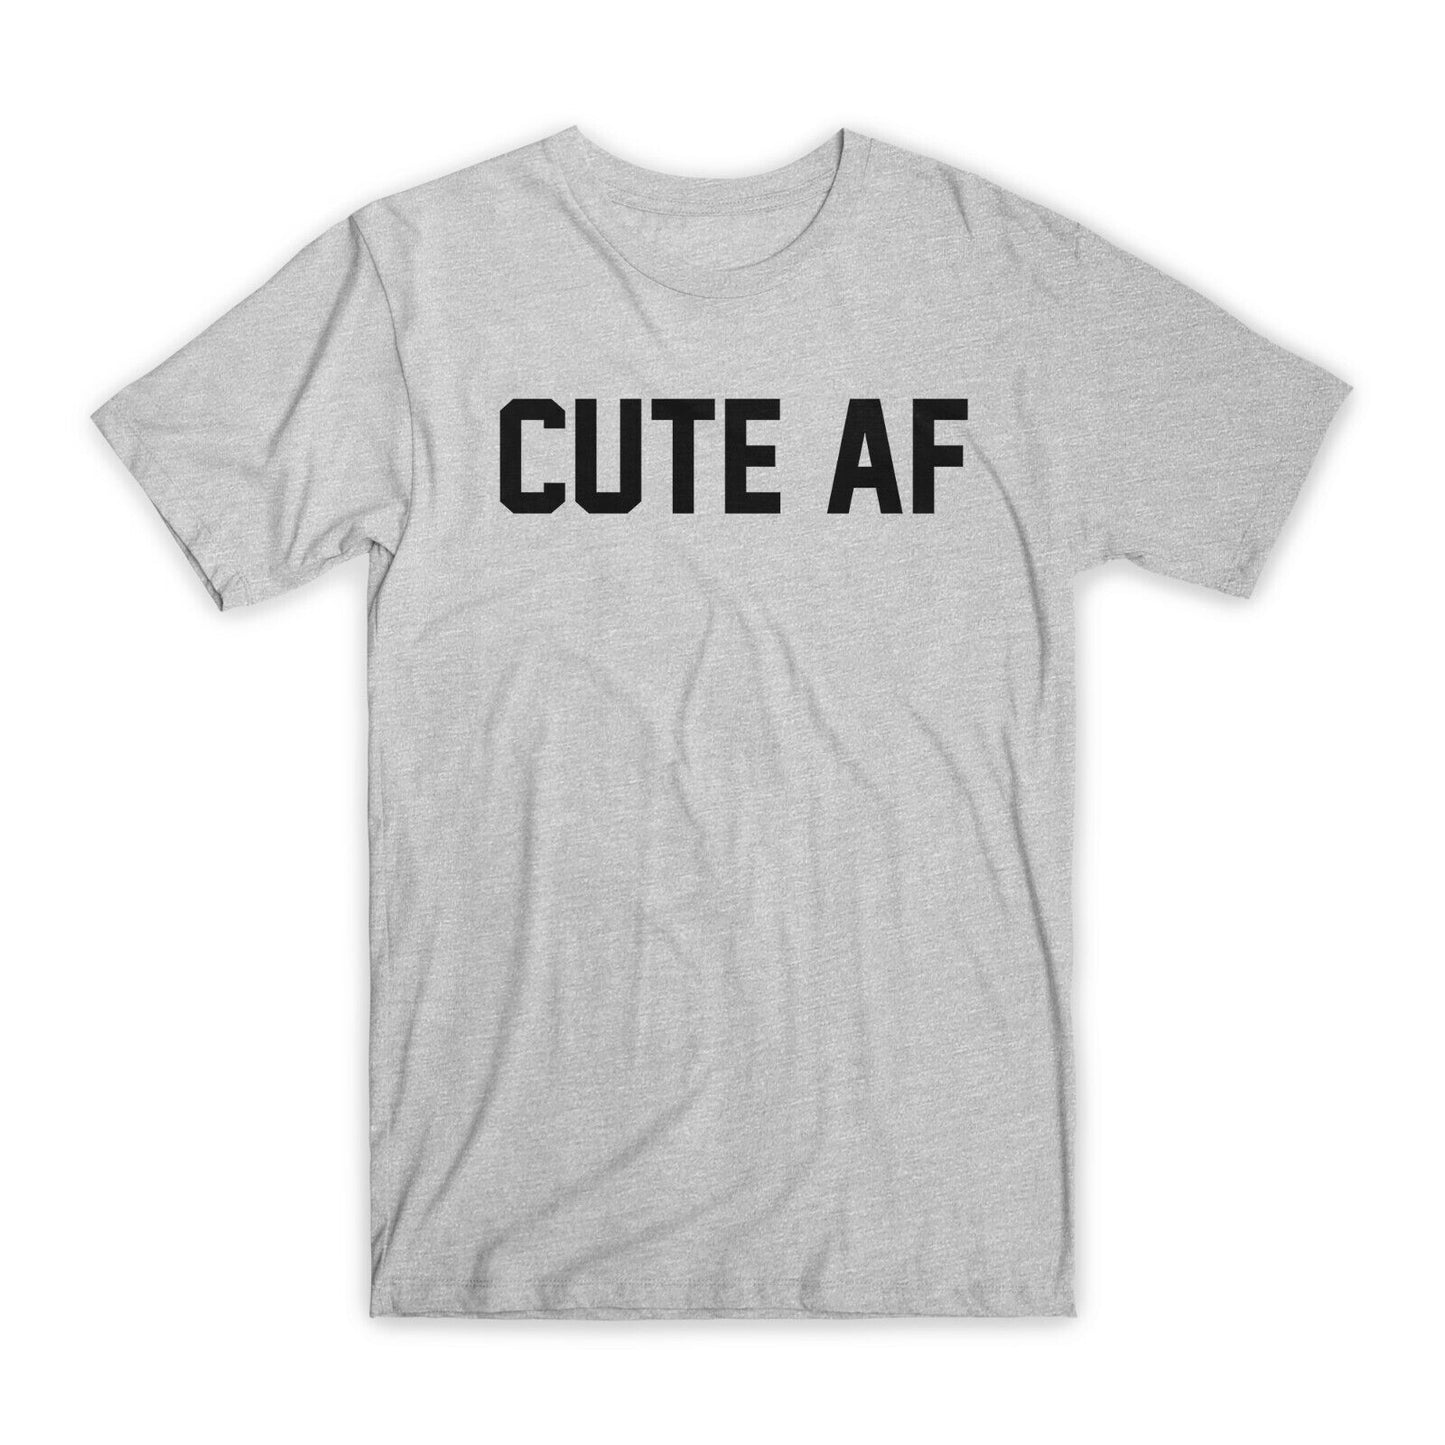 Cute AF Printed T-Shirt Premium Soft Cotton Crew Neck Funny Tee Novelty Gift NEW